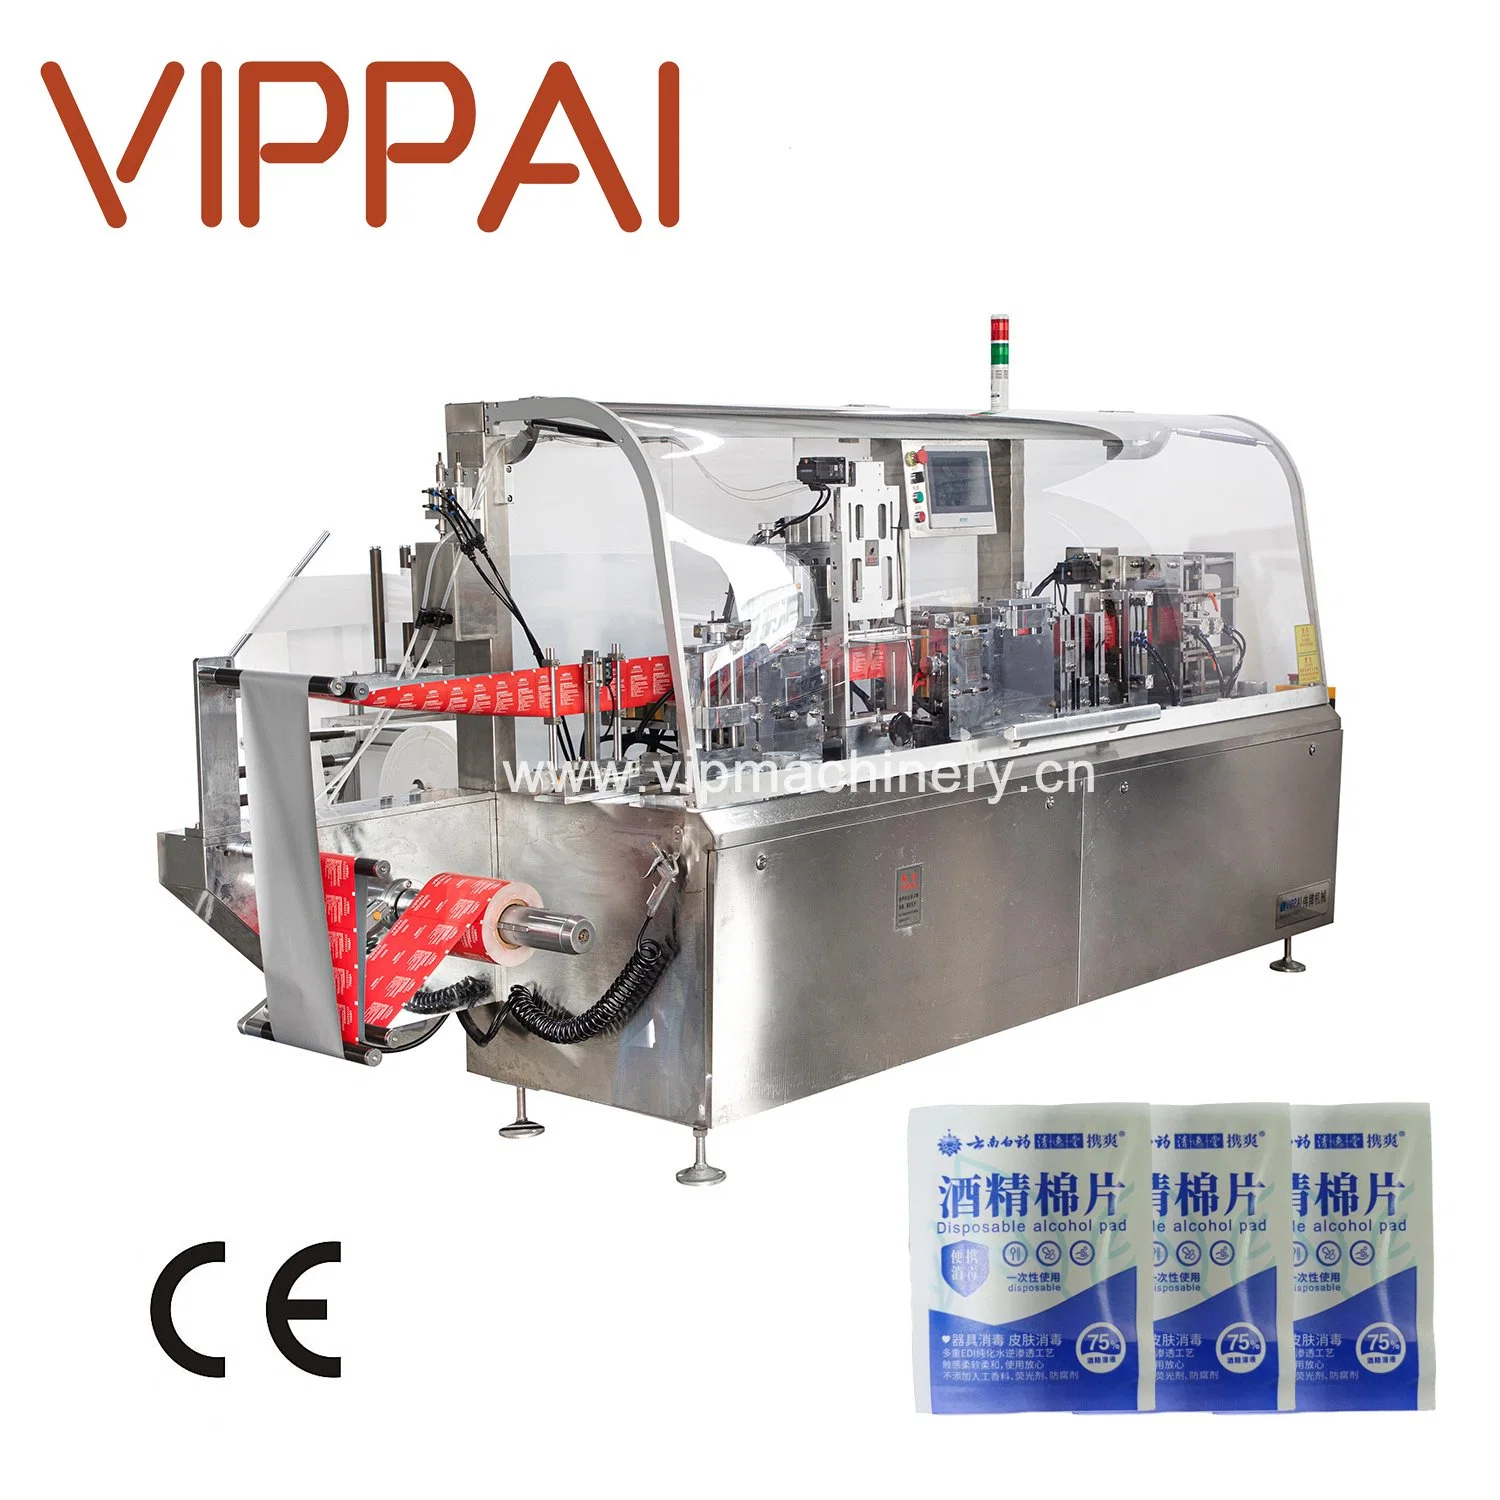 Vippai Glasses Wipes Cleaning Wipes Packaging Machine Screen Wipe Wipes Wet Strength Paper Non-Woven Fabric